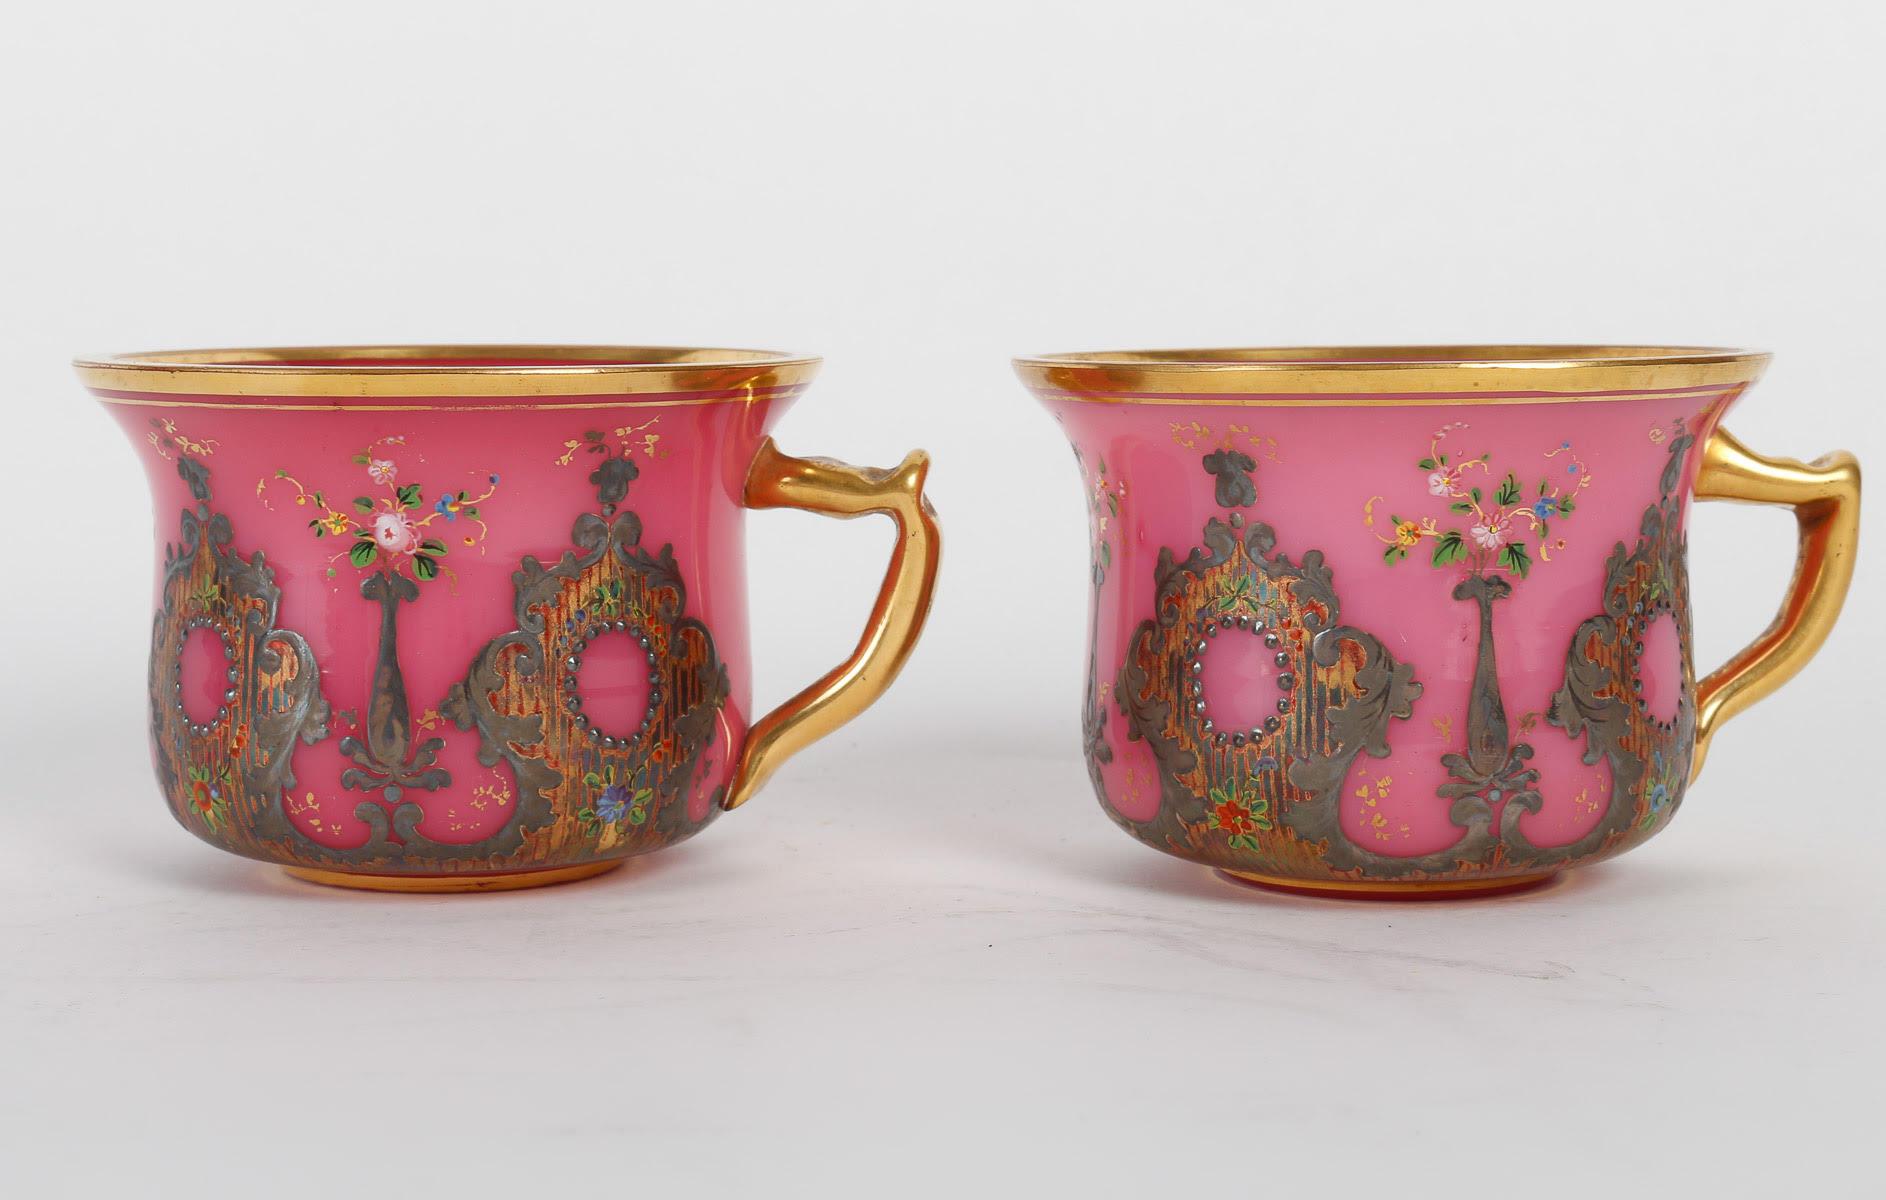 White and Pink Opaline Service Enamelled with Silver and Gold, 19th Century. 12